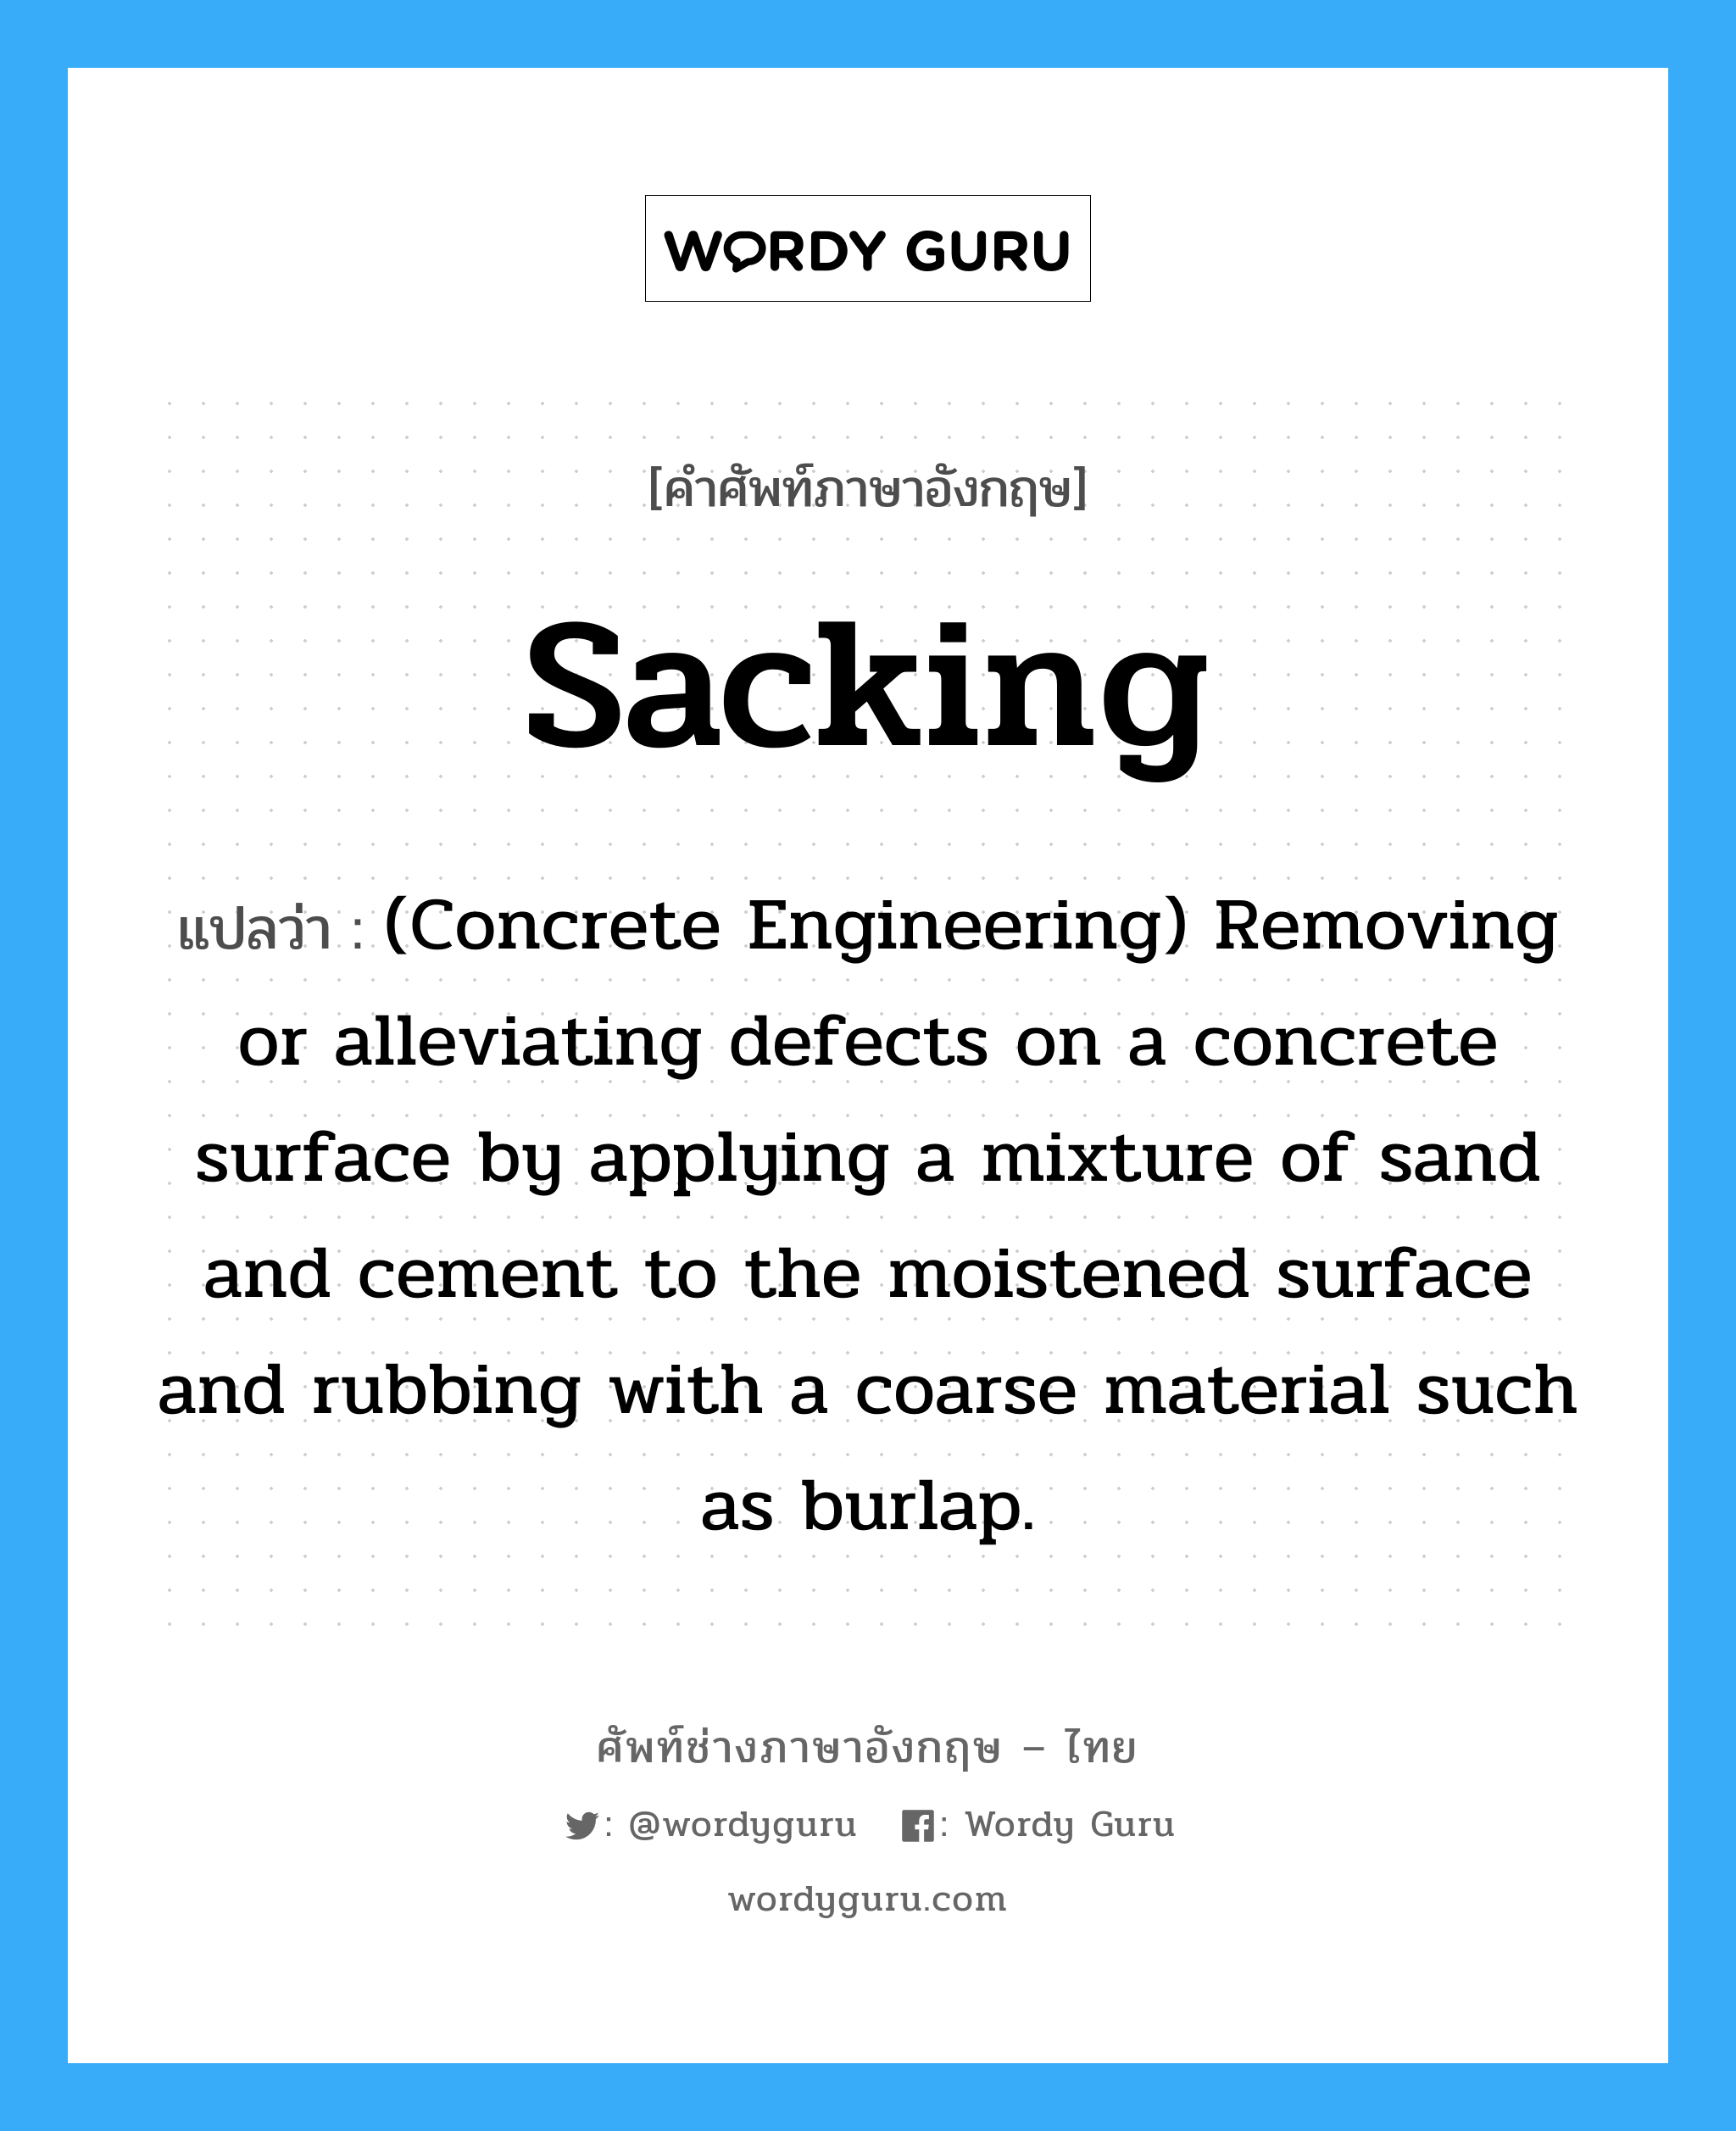 Sacking แปลว่า?, คำศัพท์ช่างภาษาอังกฤษ - ไทย Sacking คำศัพท์ภาษาอังกฤษ Sacking แปลว่า (Concrete Engineering) Removing or alleviating defects on a concrete surface by applying a mixture of sand and cement to the moistened surface and rubbing with a coarse material such as burlap.